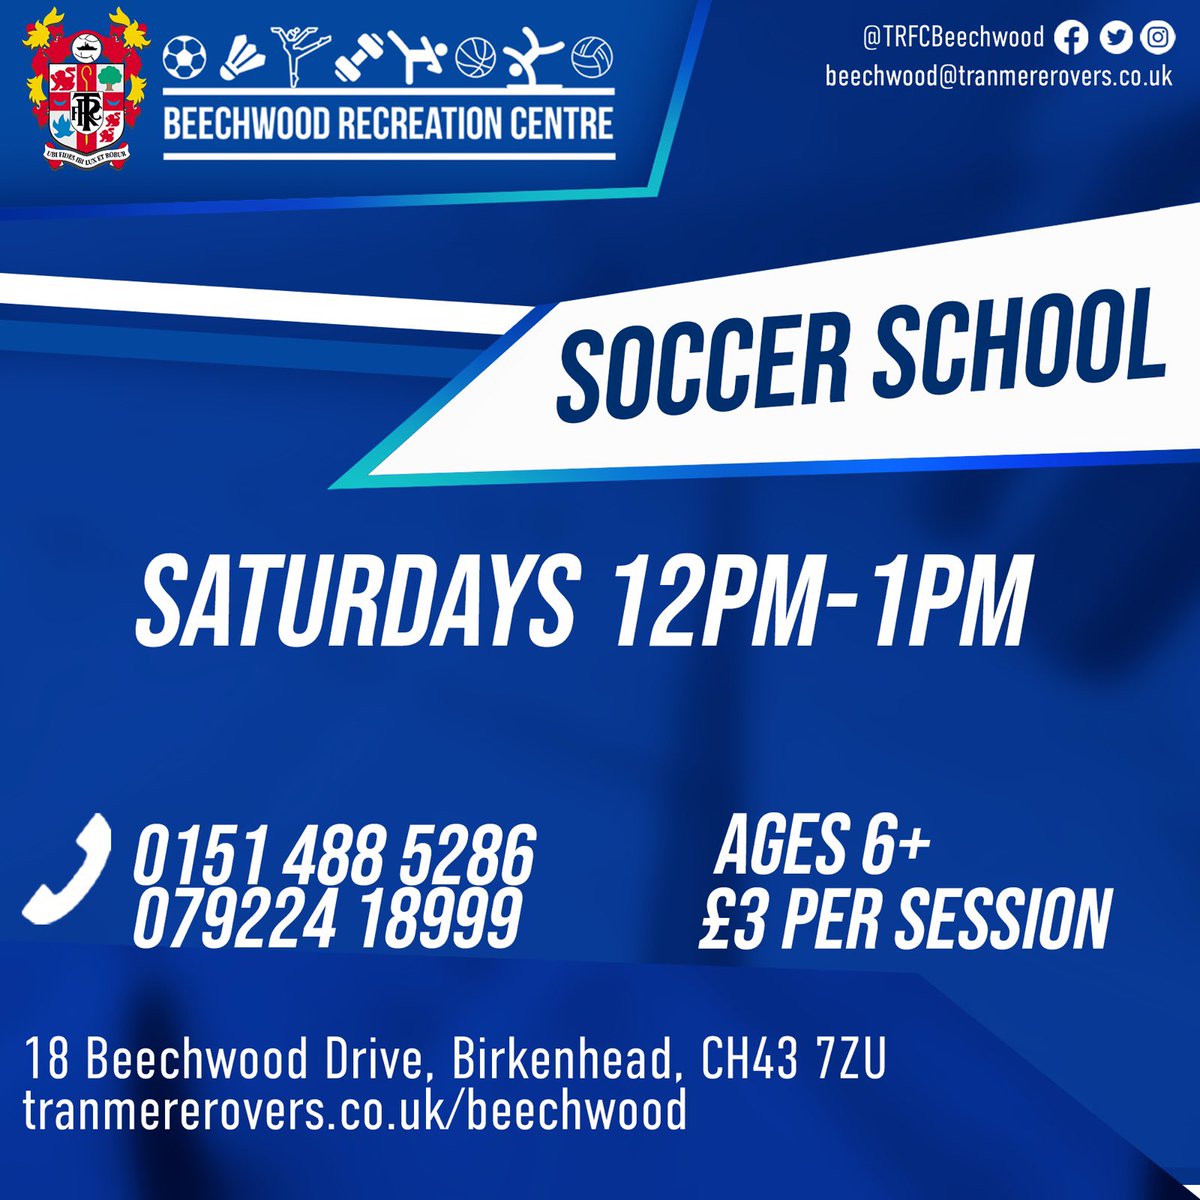 ⚽️ Come and join us at Soccer School today from 12pm-1pm for kids aged 6+, at just £3 per session! #TRFC #SWA